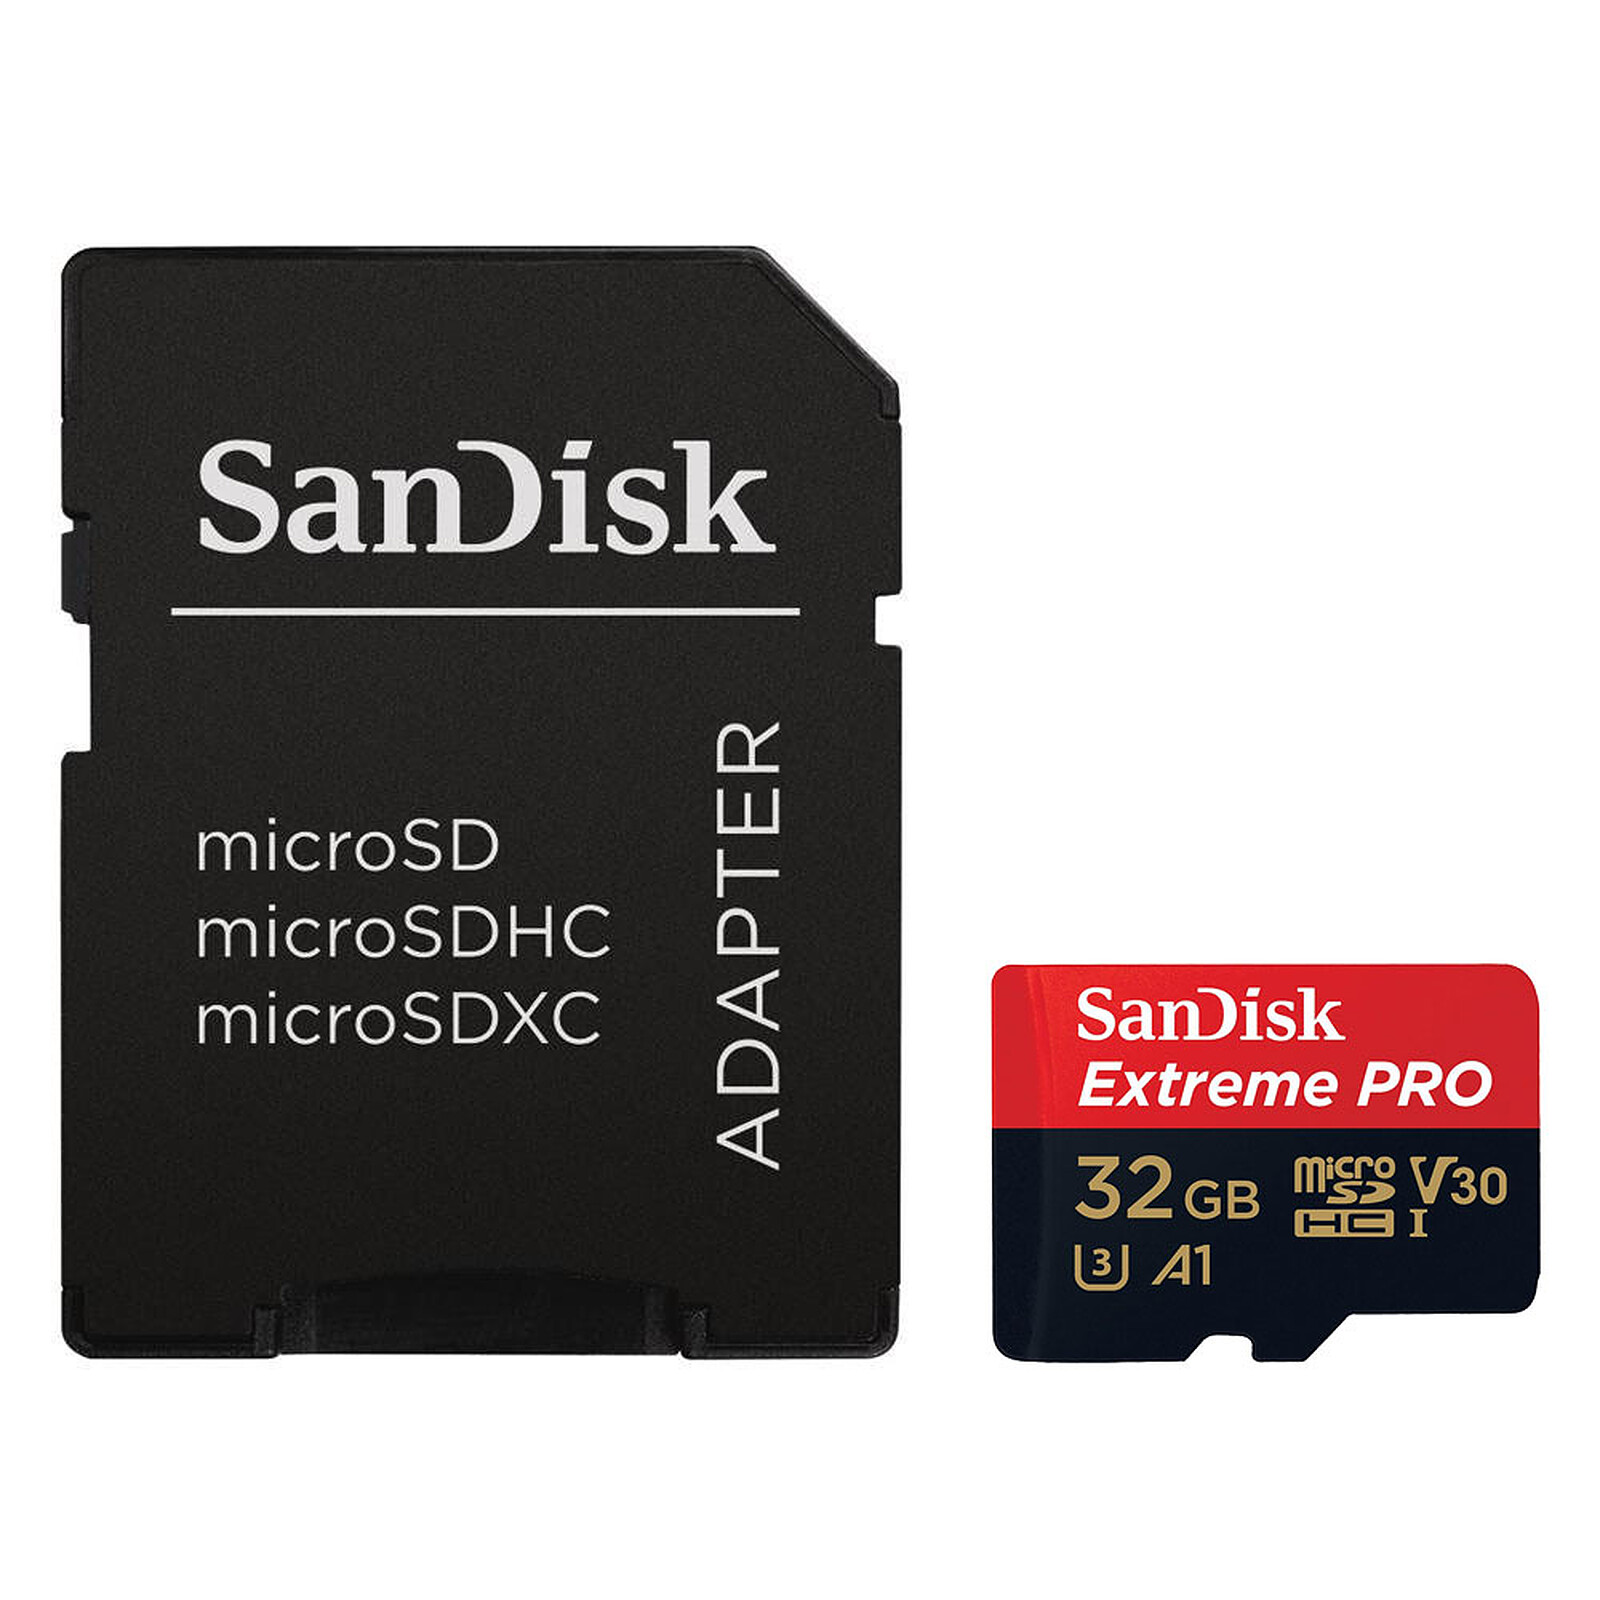 hard to please Sideways clarity SanDisk Extreme Pro microSDHC UHS-I U3 V30 A1 32GB SD Adapter - Memory card  Sandisk on LDLC